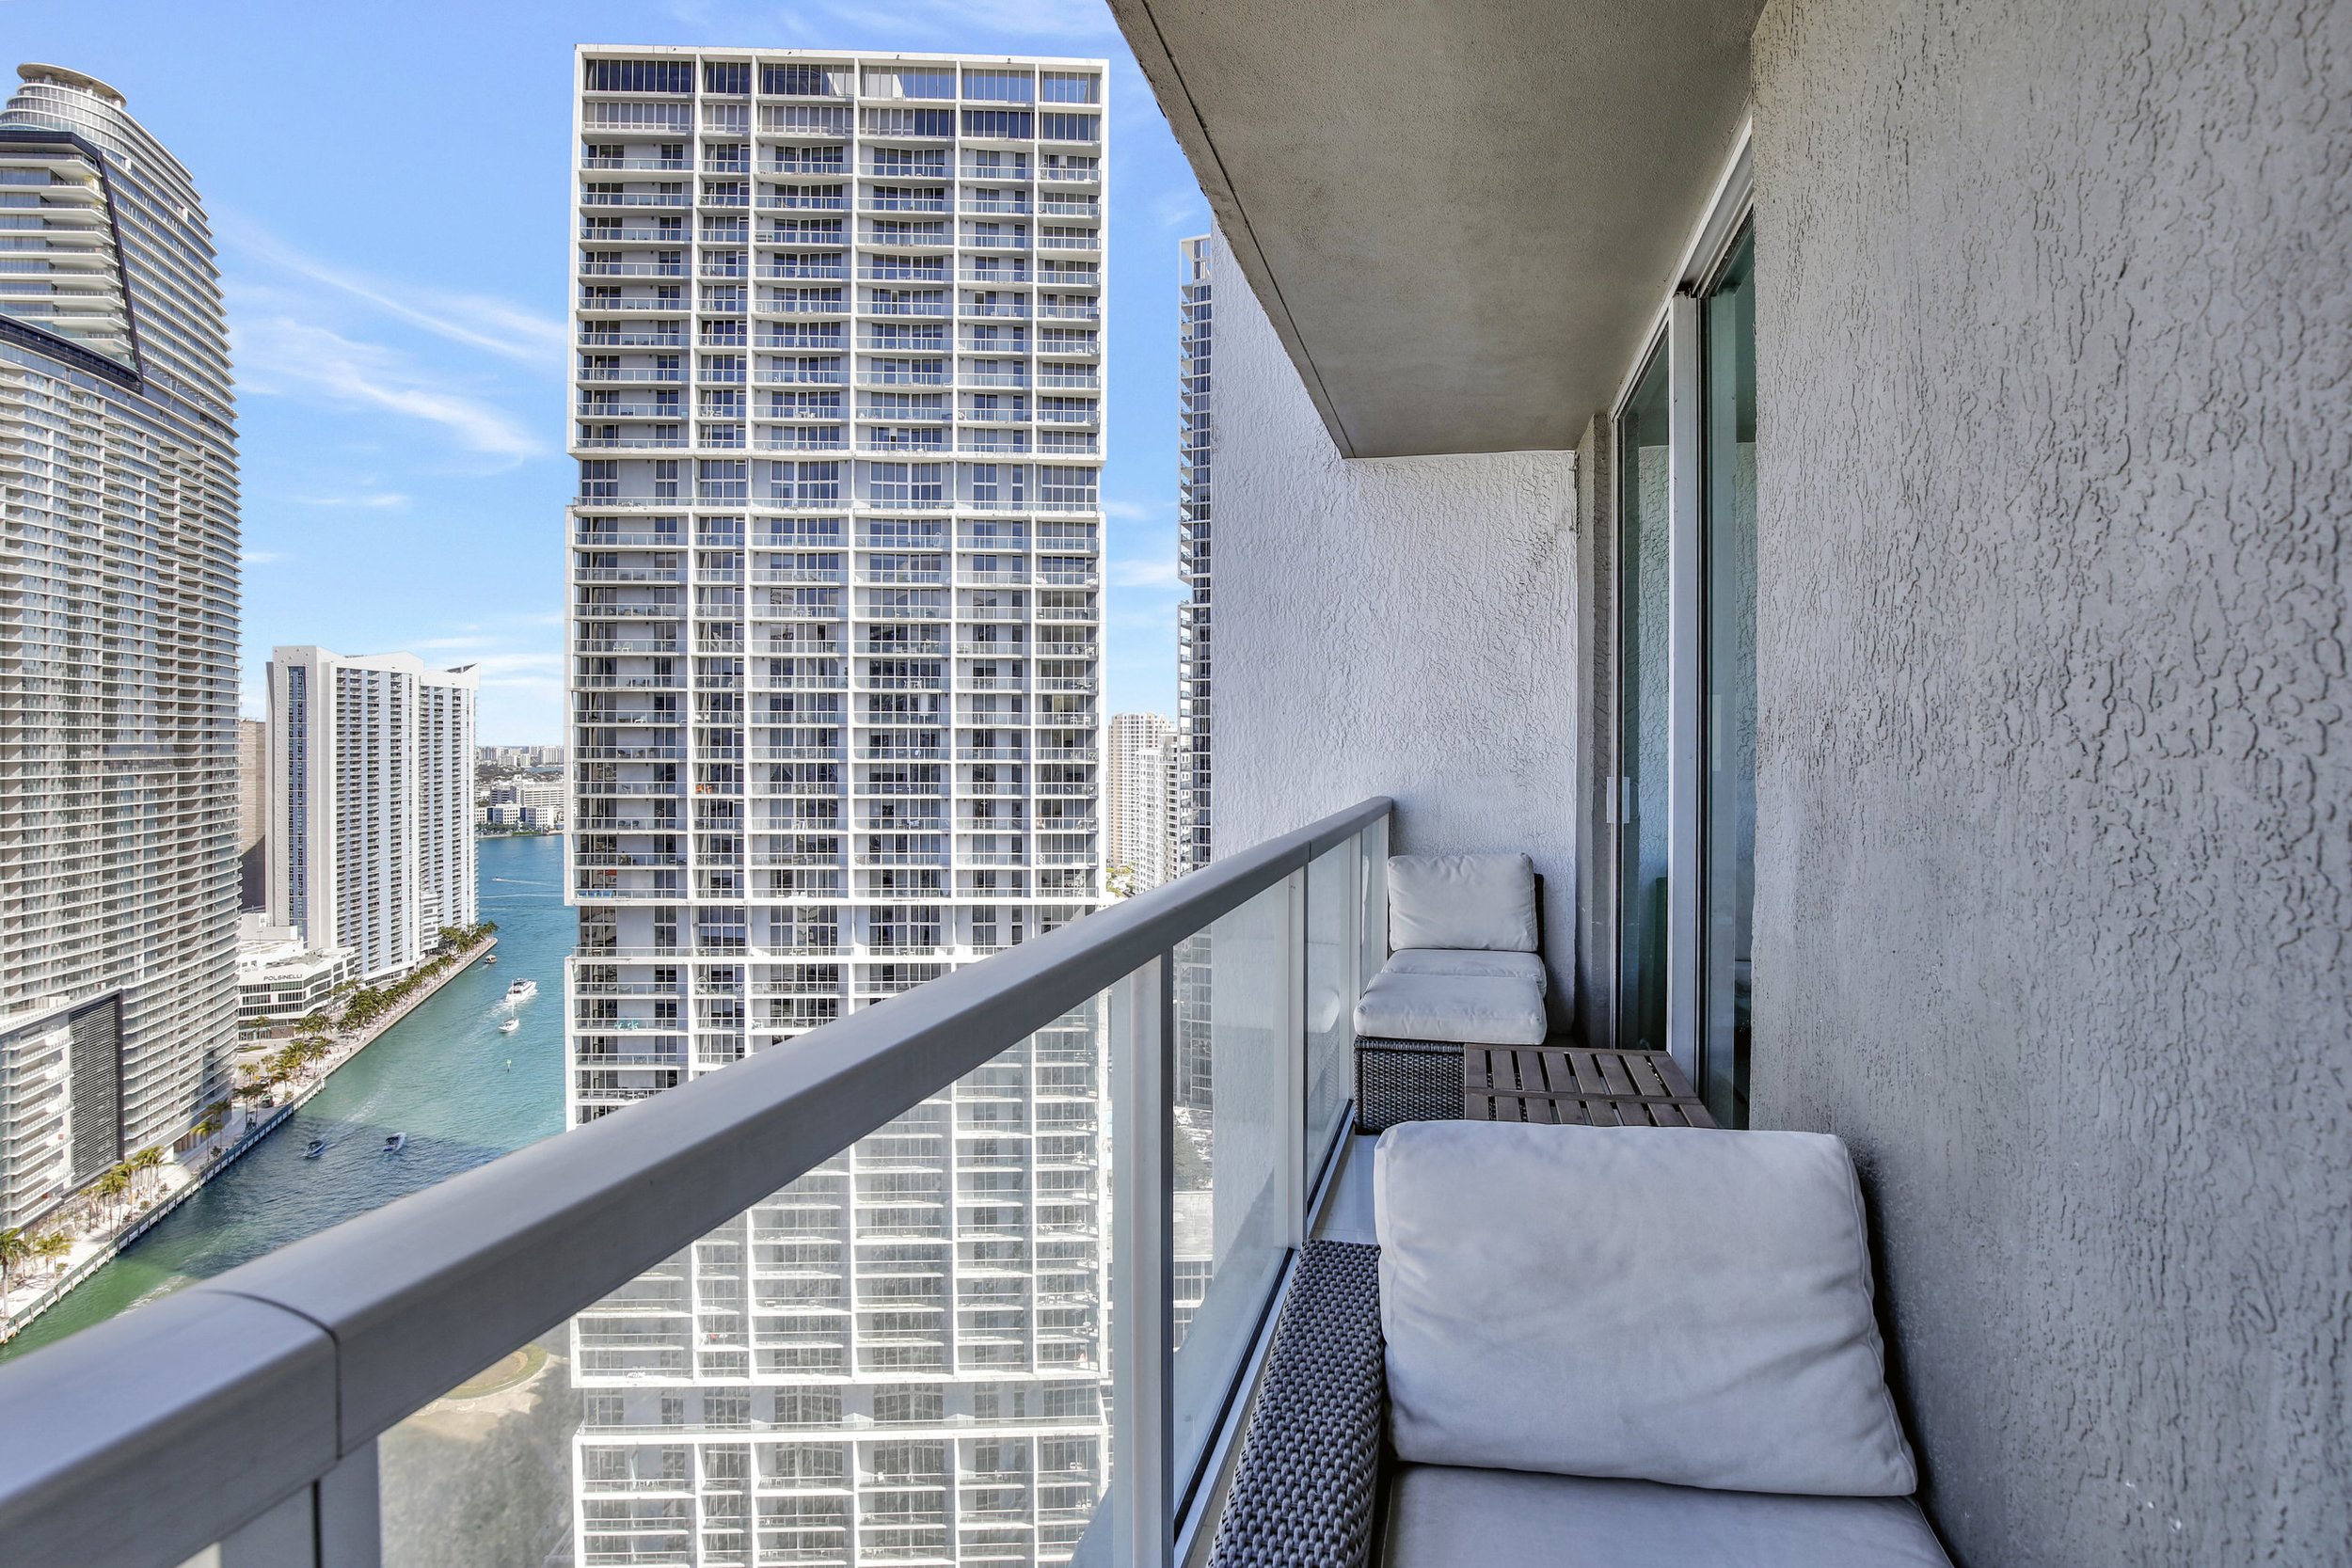 Check Out This Two-Bedroom Condo For Under $900K In Brickell 8.jpg